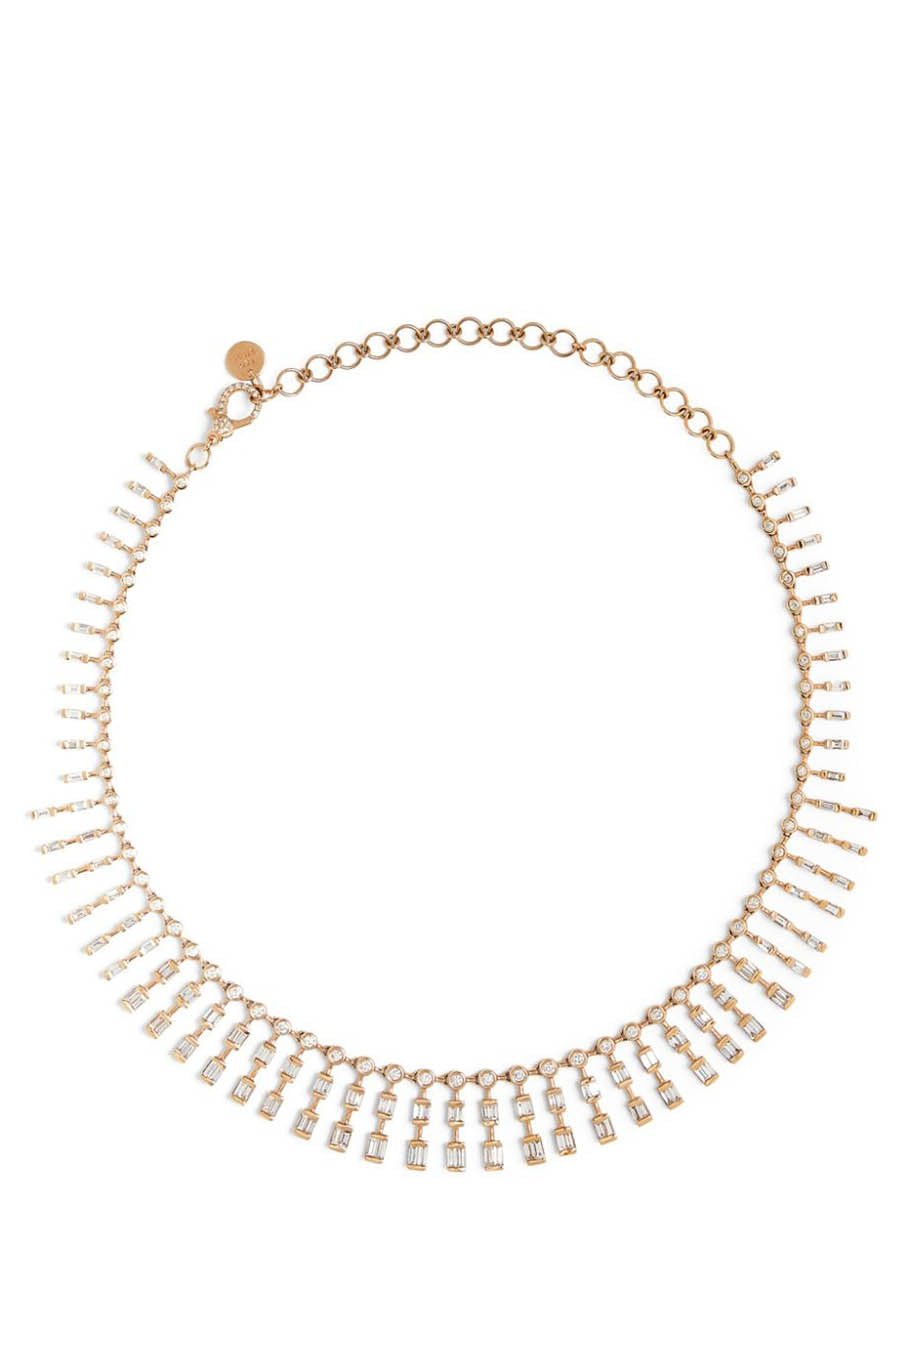 SHAY JEWELRY-Triple Dot Dash Necklace-ROSE GOLD